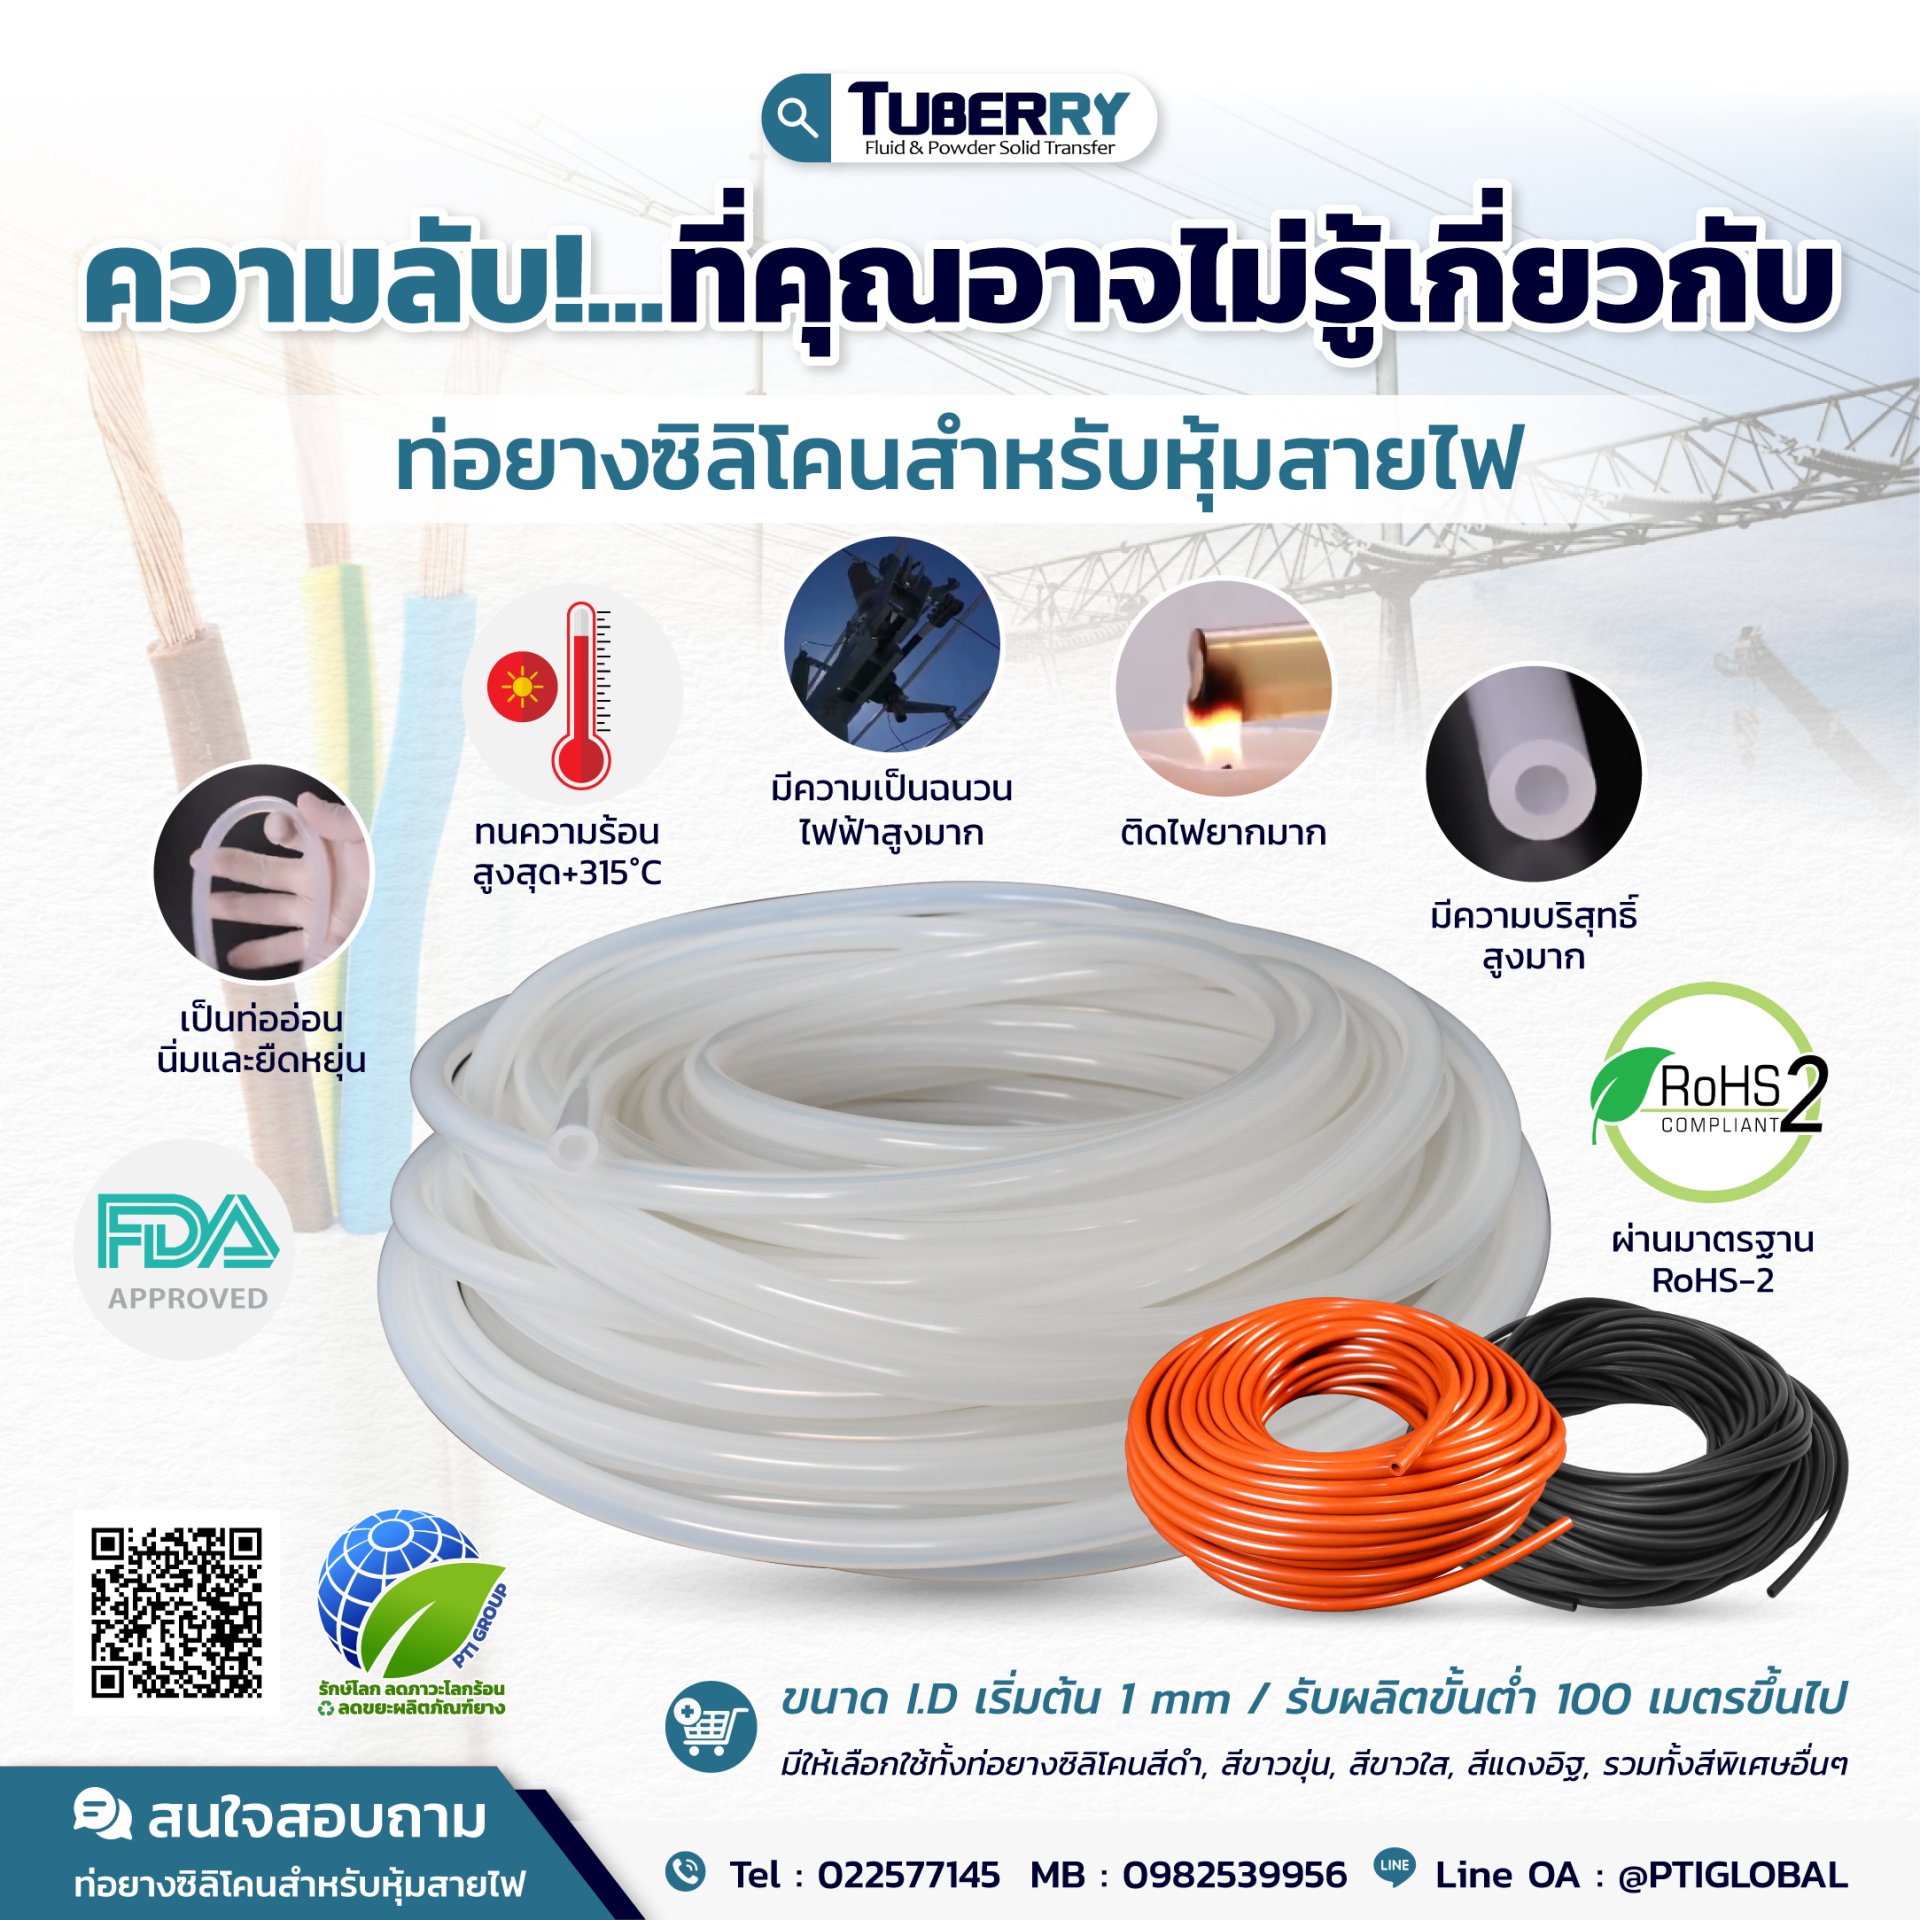 Secrets you may not know about silicone rubber tubing for insulating cables